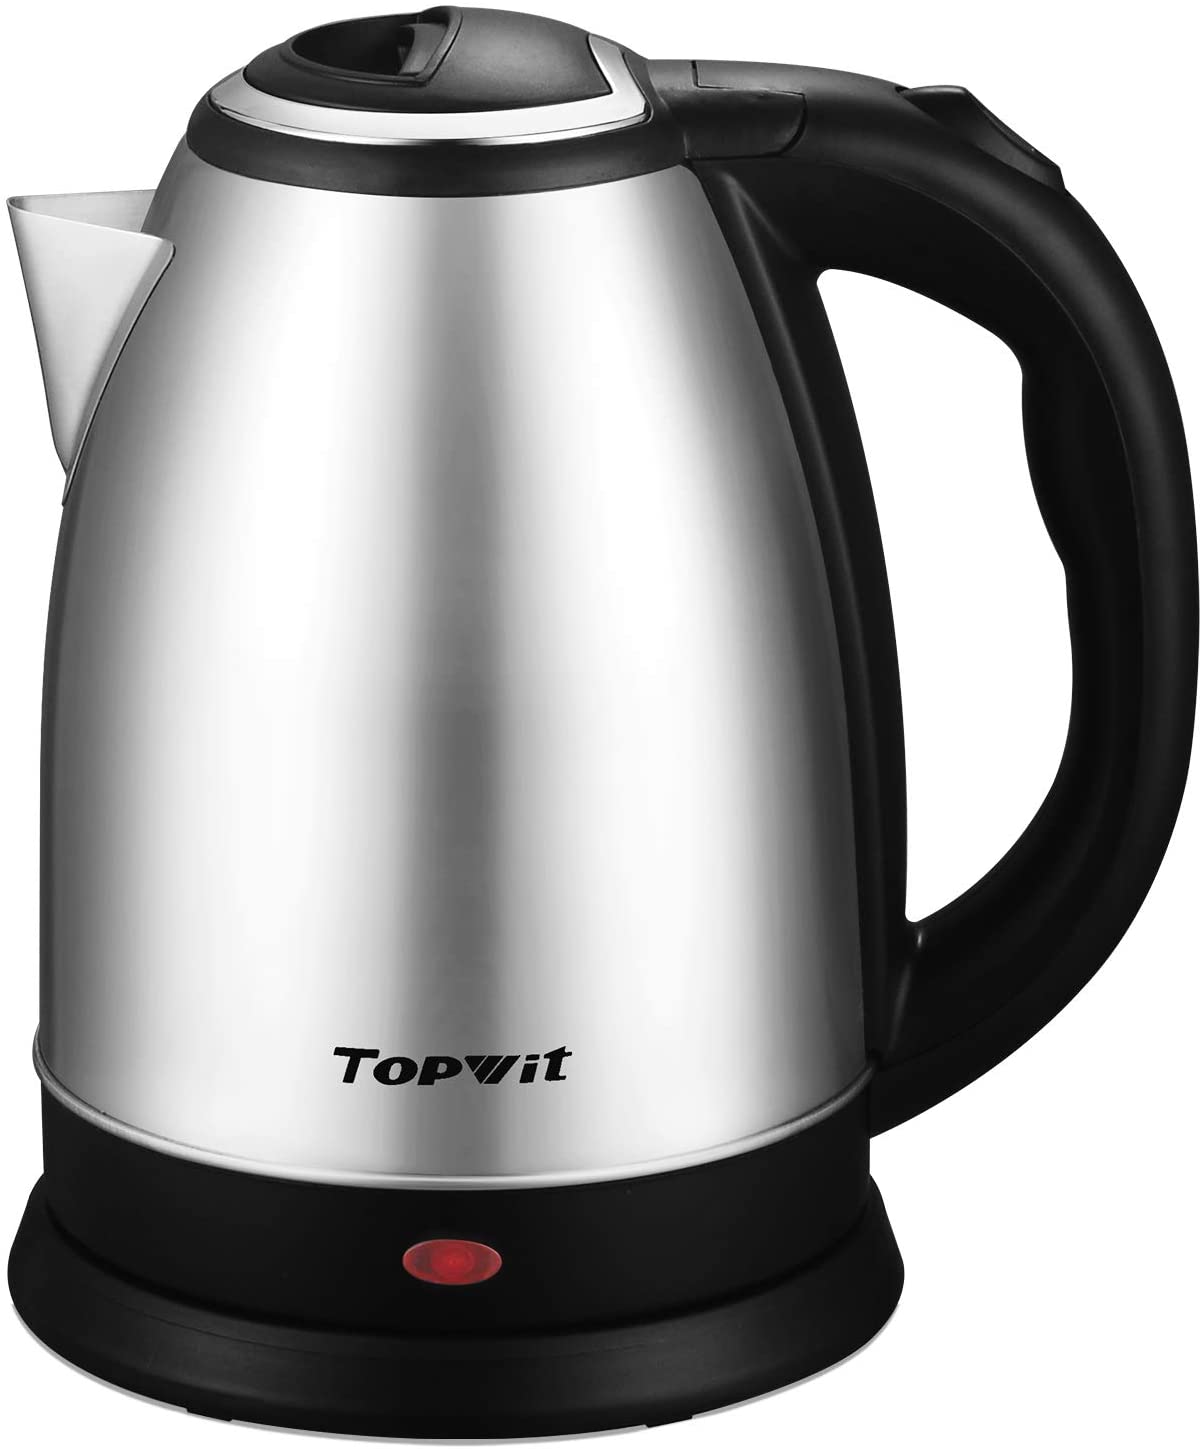 https://www.dontwasteyourmoney.com/wp-content/uploads/2020/04/topwit-electric-stainless-steel-cordless-hot-water-kettle-electric-kettle-for-coffee.jpg